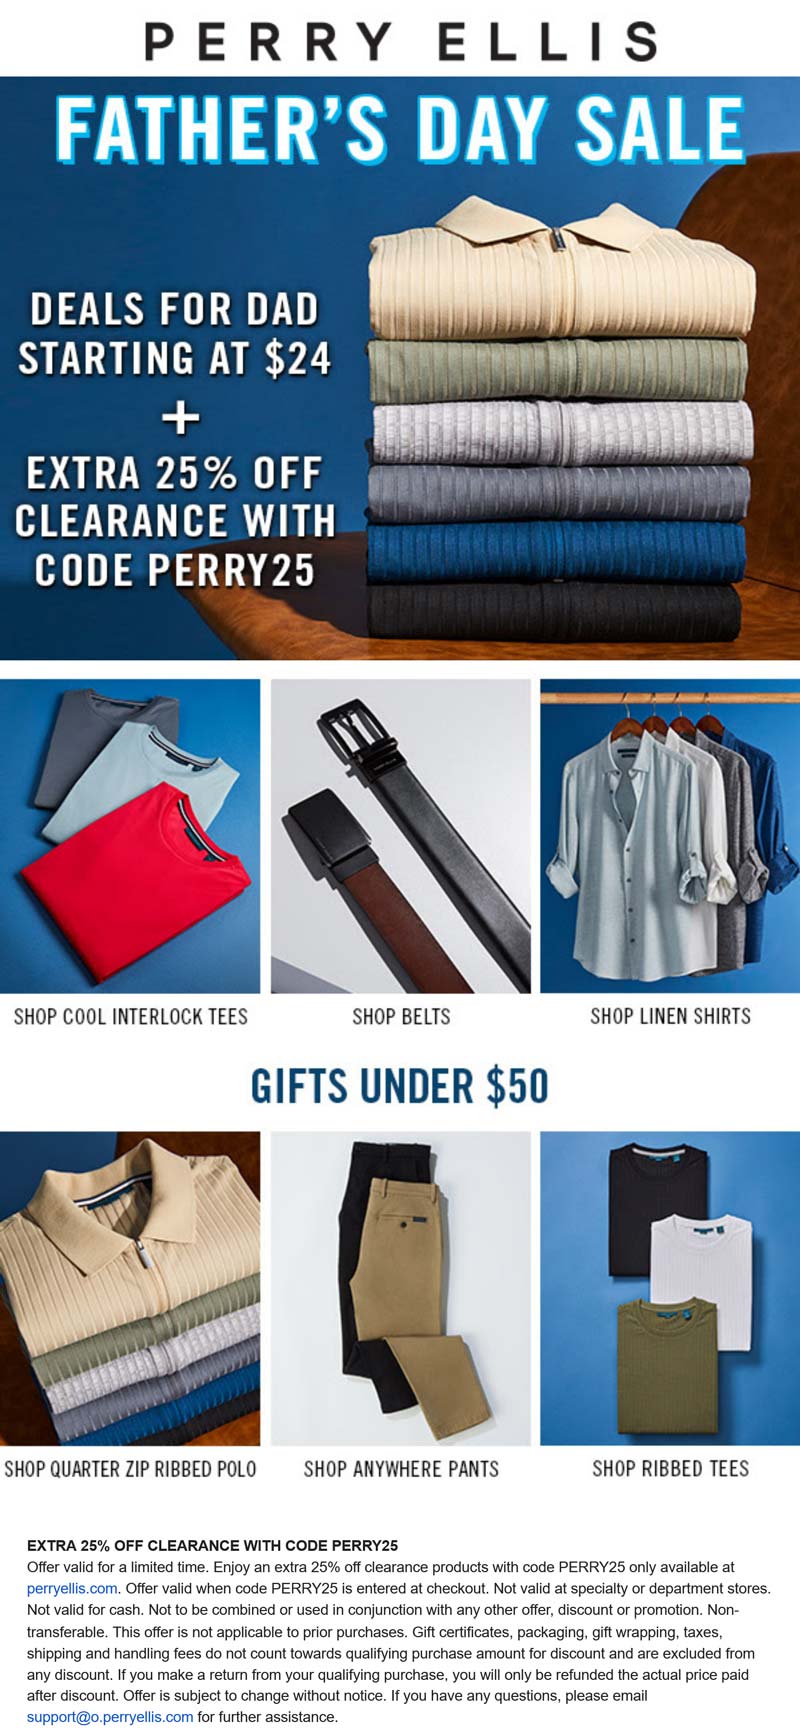 Perry Ellis stores Coupon  Extra 25% off clearance at Perry Ellis via promo code PERRY25 #perryellis 